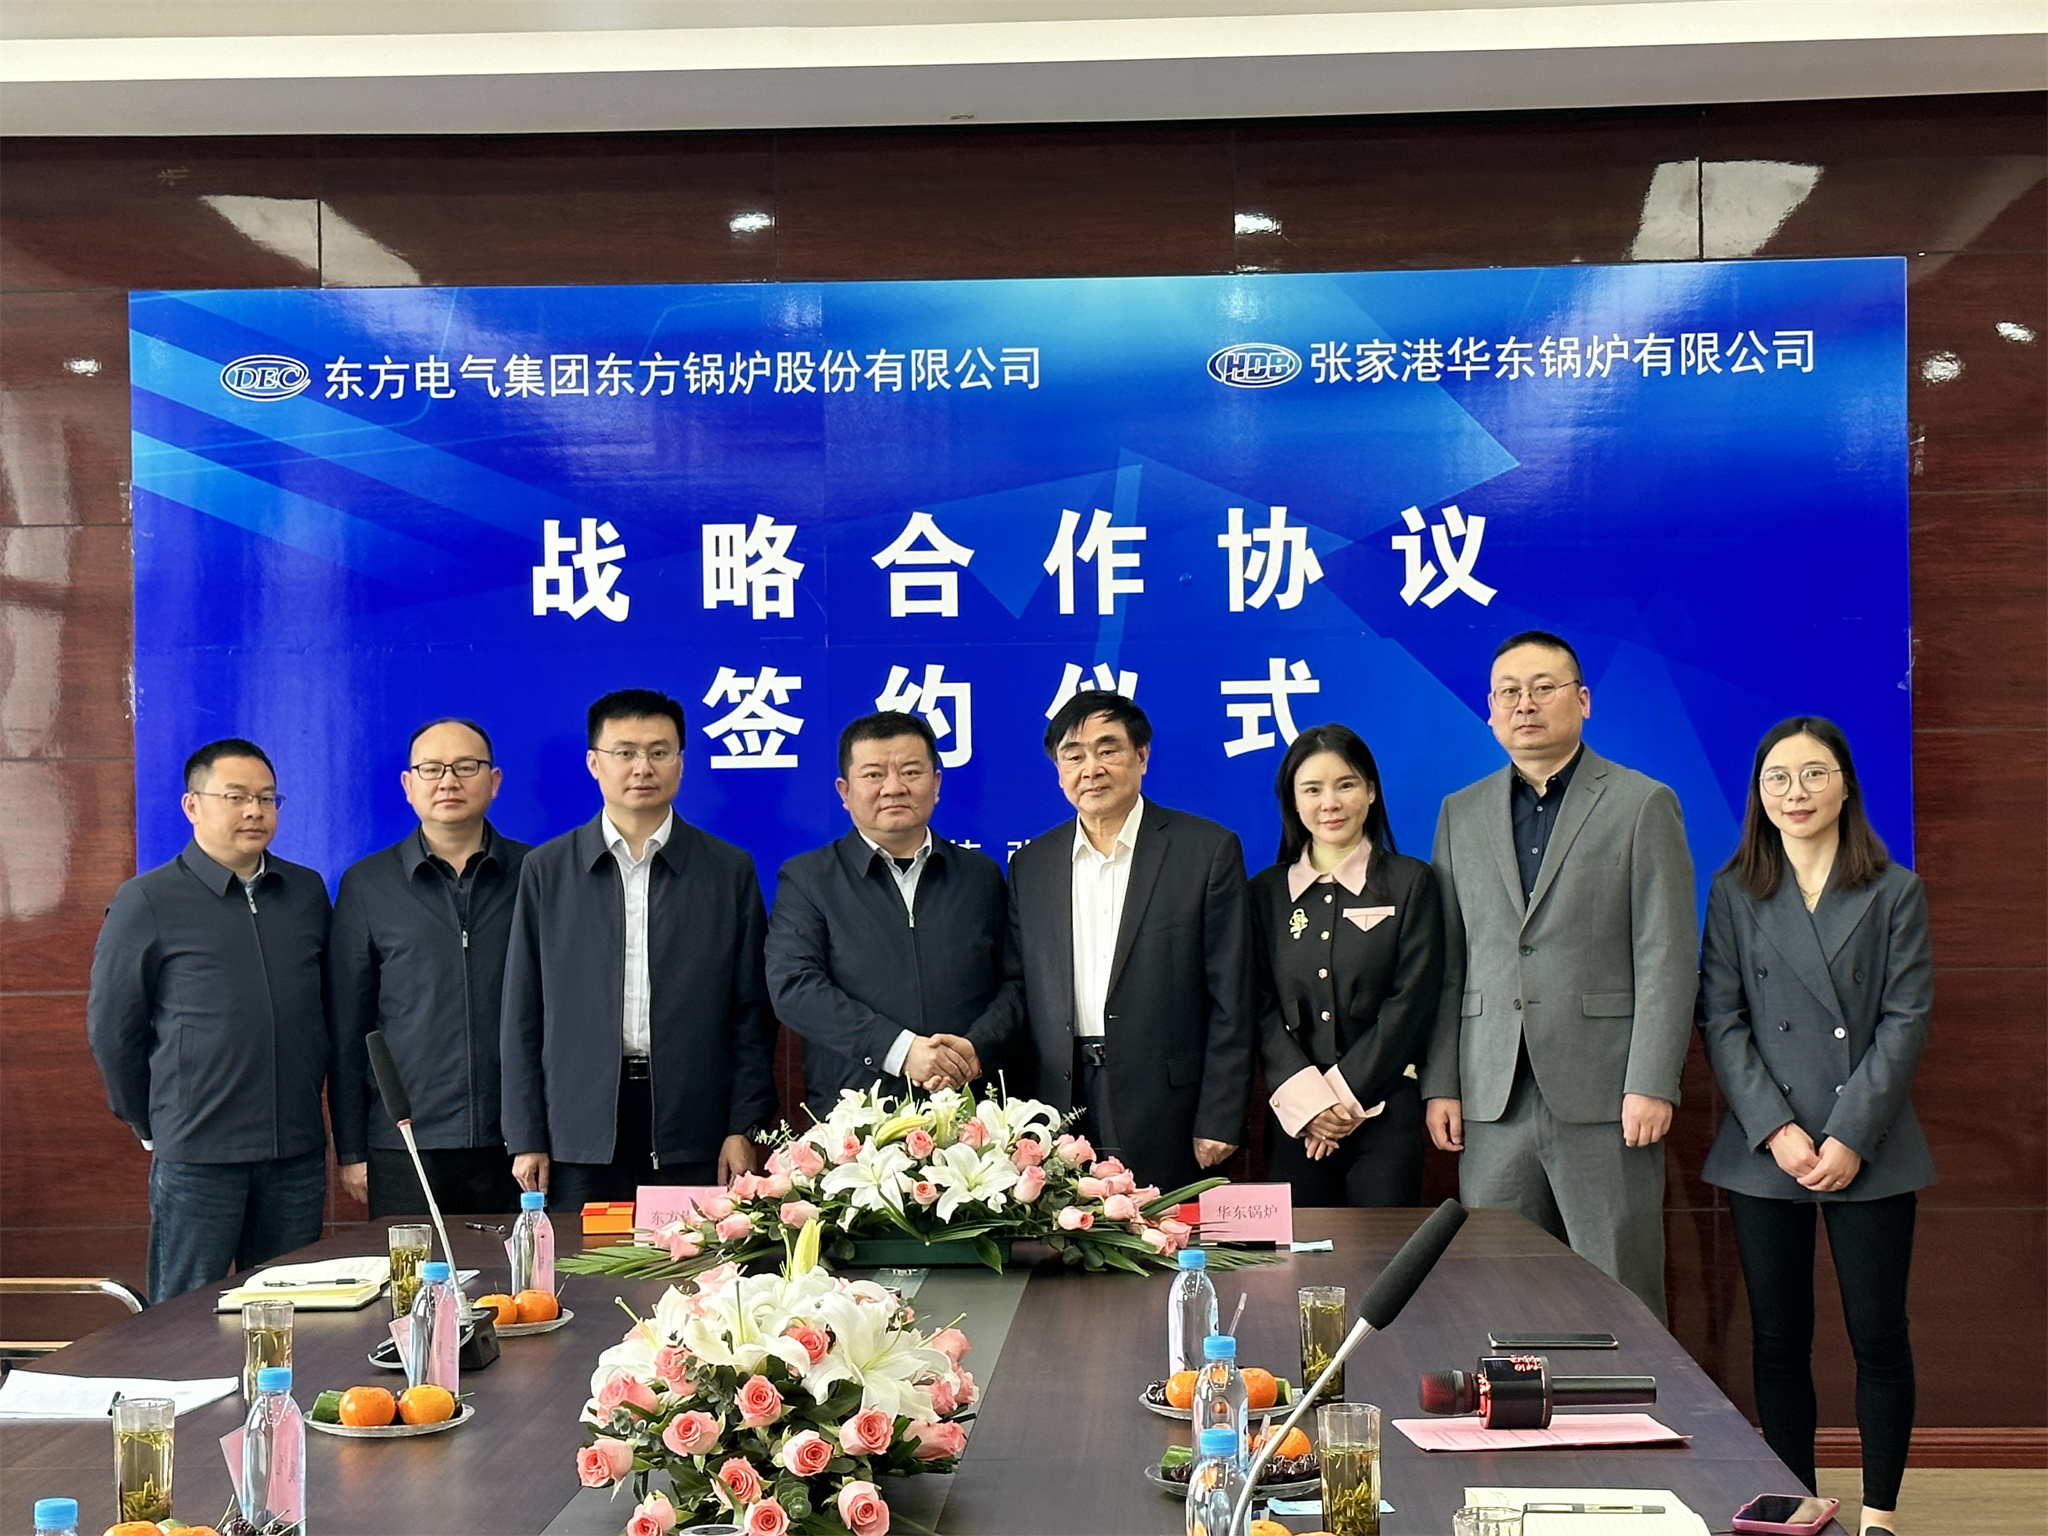 DEC Dongfang Boiler signed a strategic cooperation agreement with HD Boiler